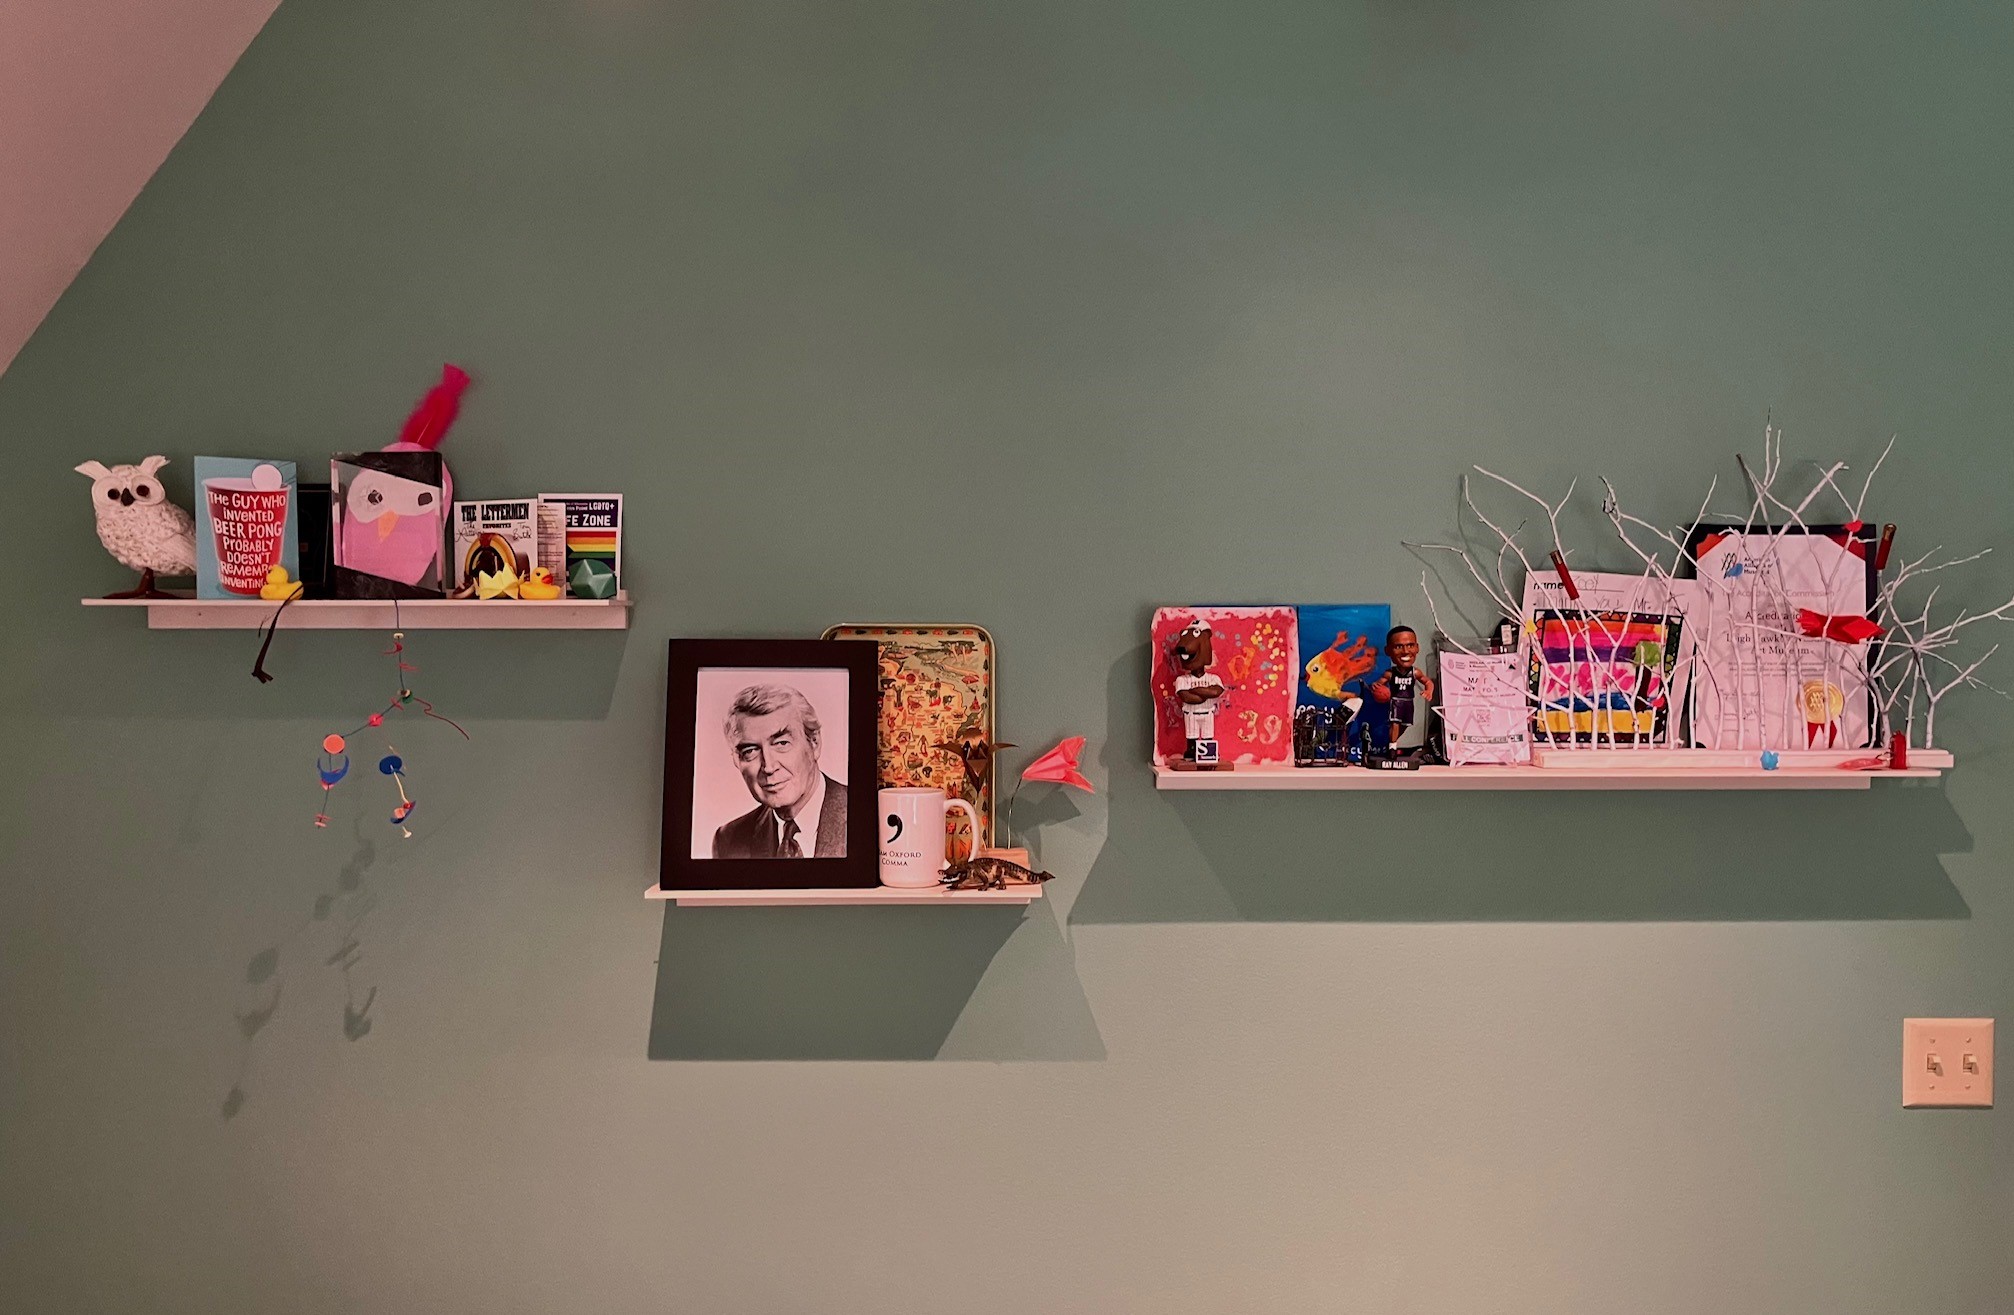 This image shows many items on shelves in an office. Among the items is a black and white photograph of actor Jimmy Stewart